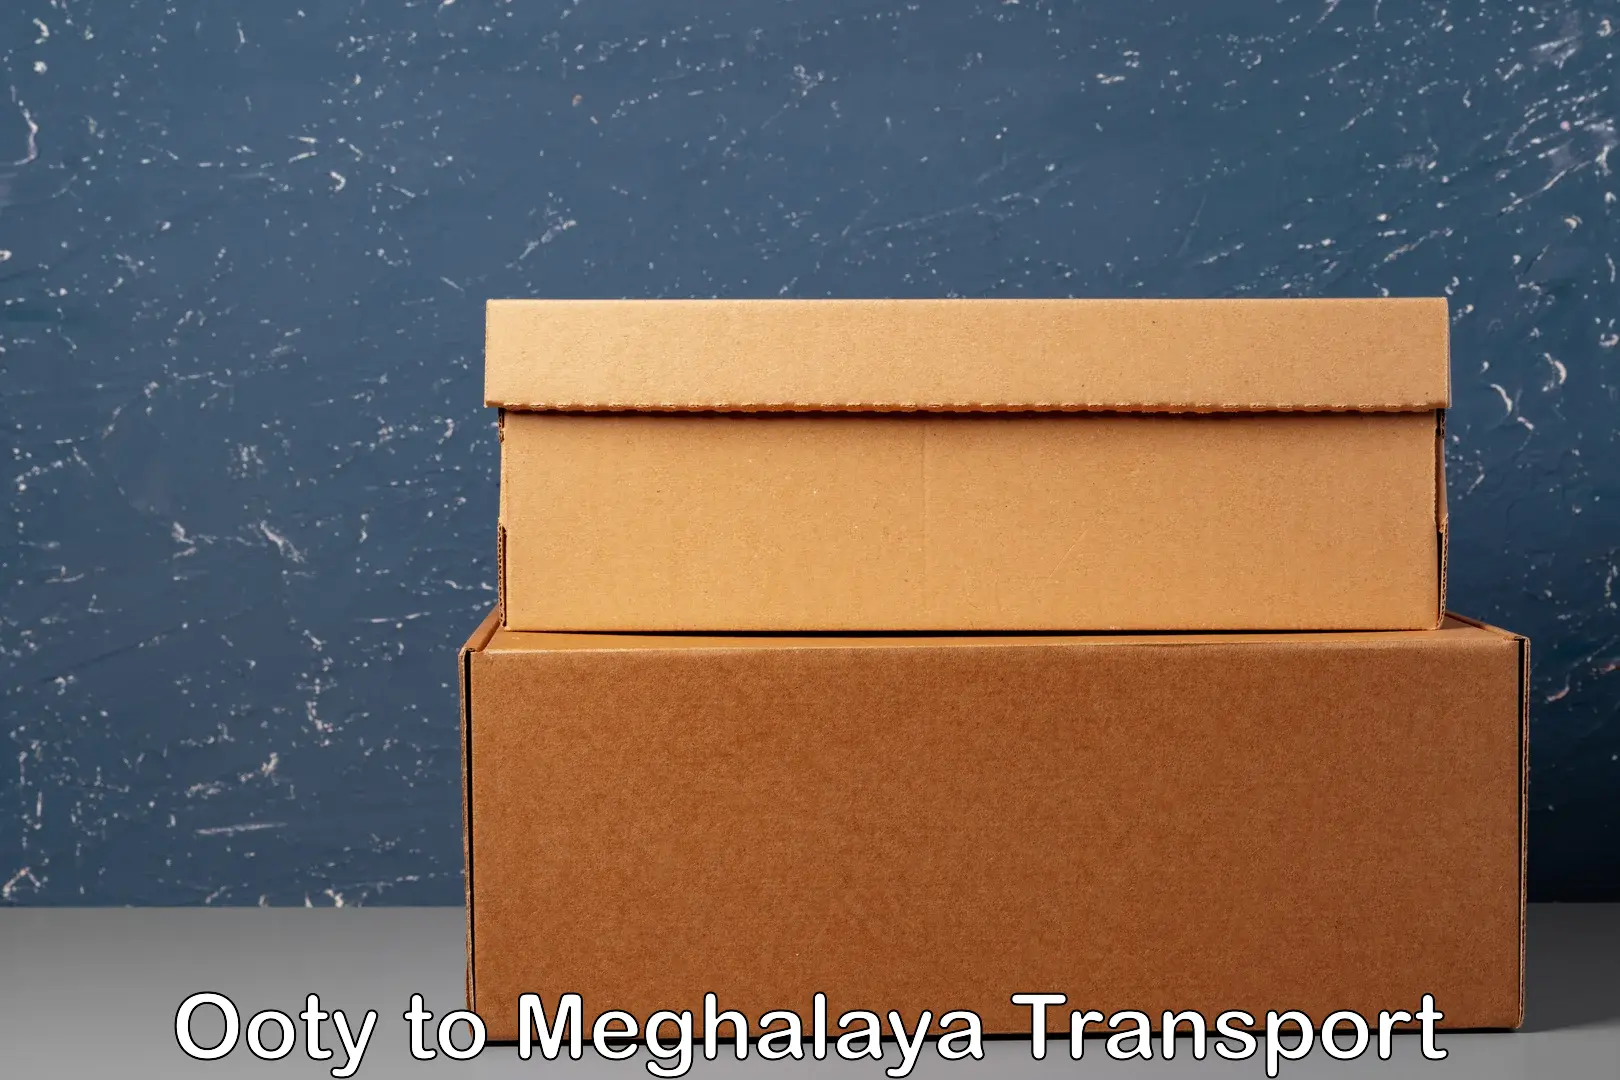 Daily transport service Ooty to Meghalaya